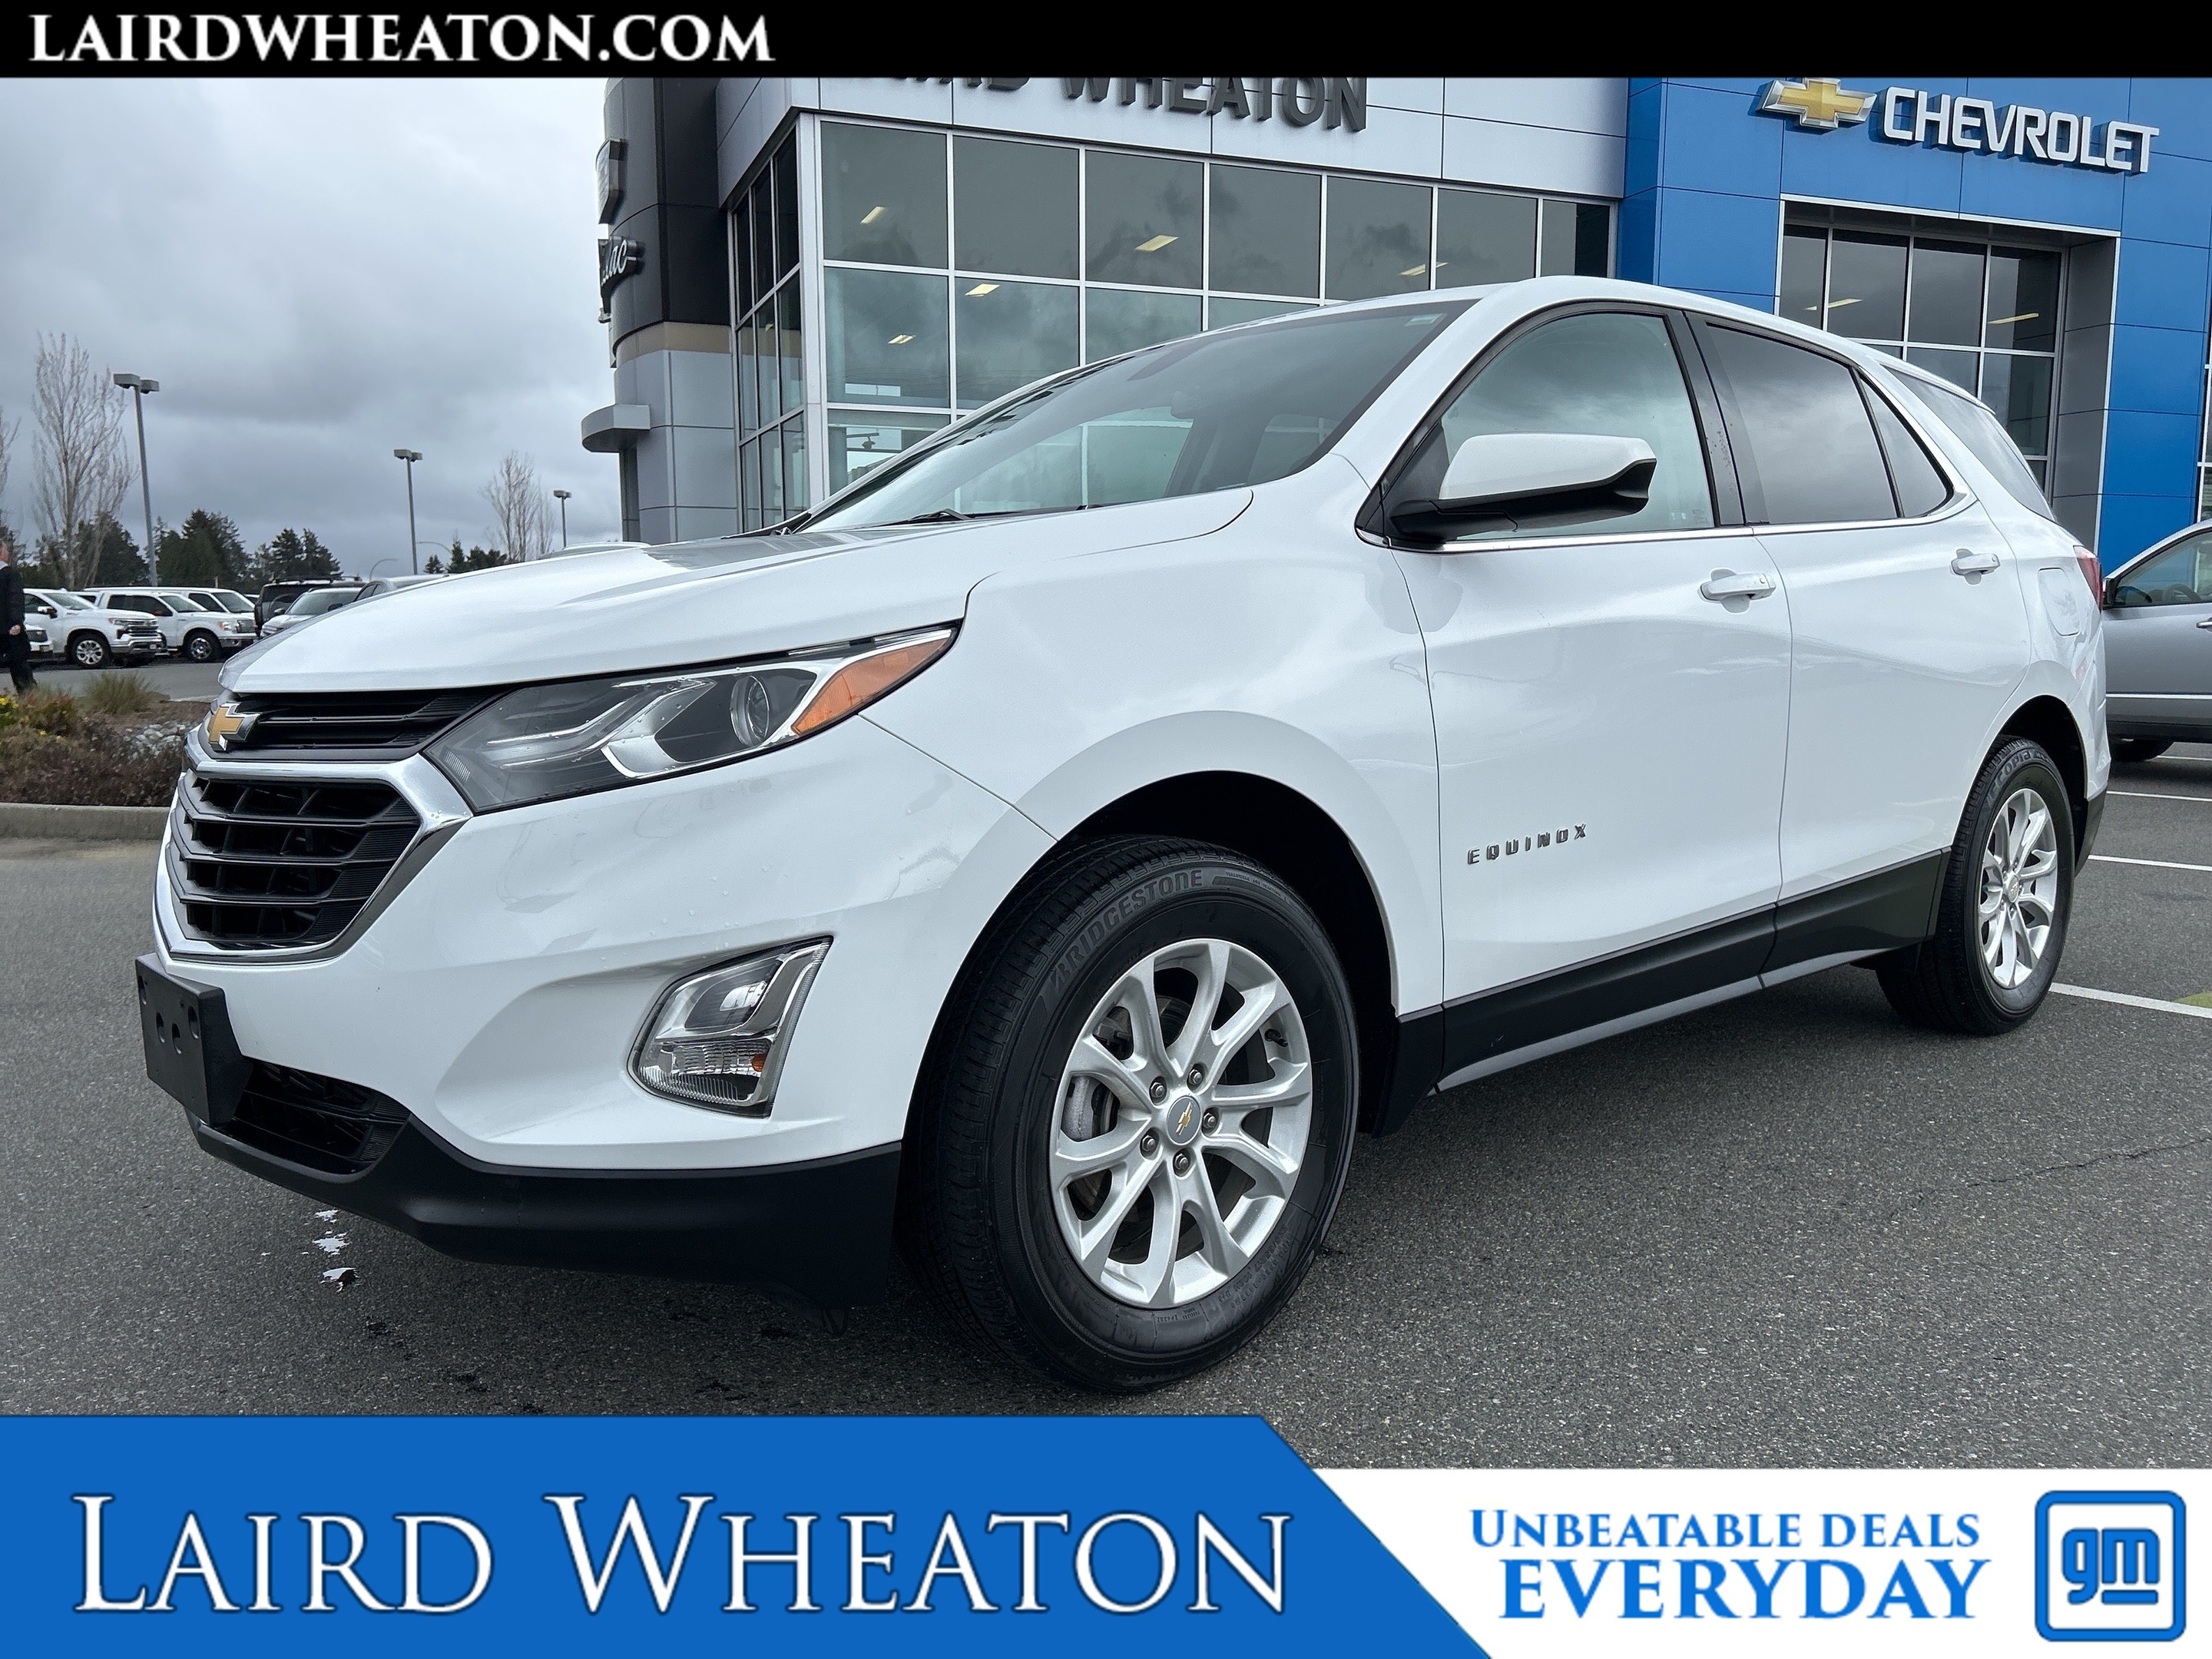 2019 Chevrolet Equinox LT AWD, 4 Cylinder, Power Group, Safety Features